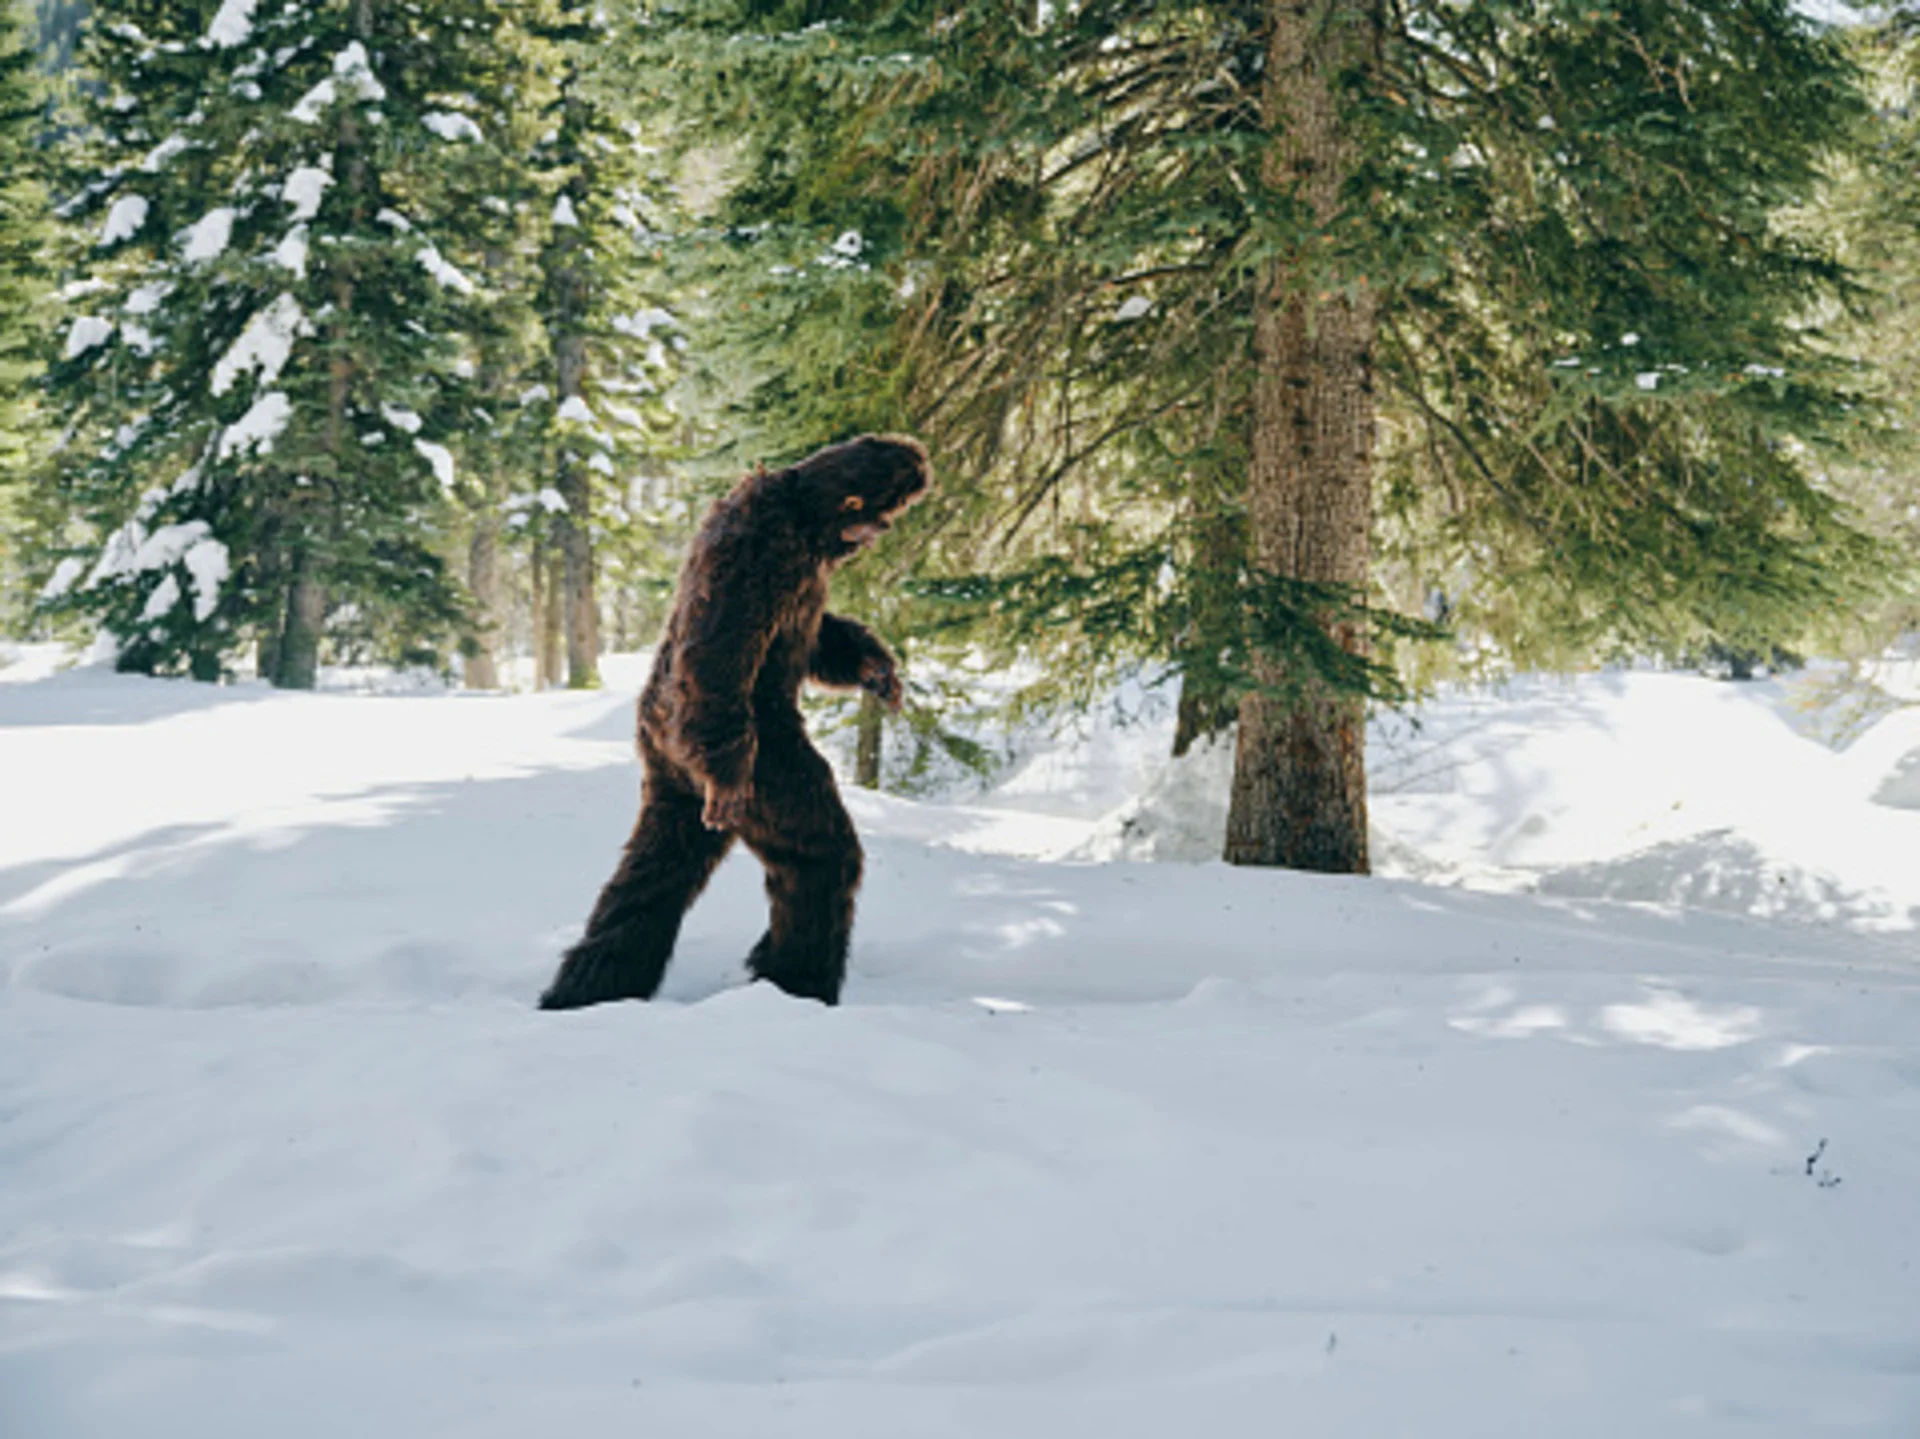 True origins of sasquatch can be traced back to this Canadian location